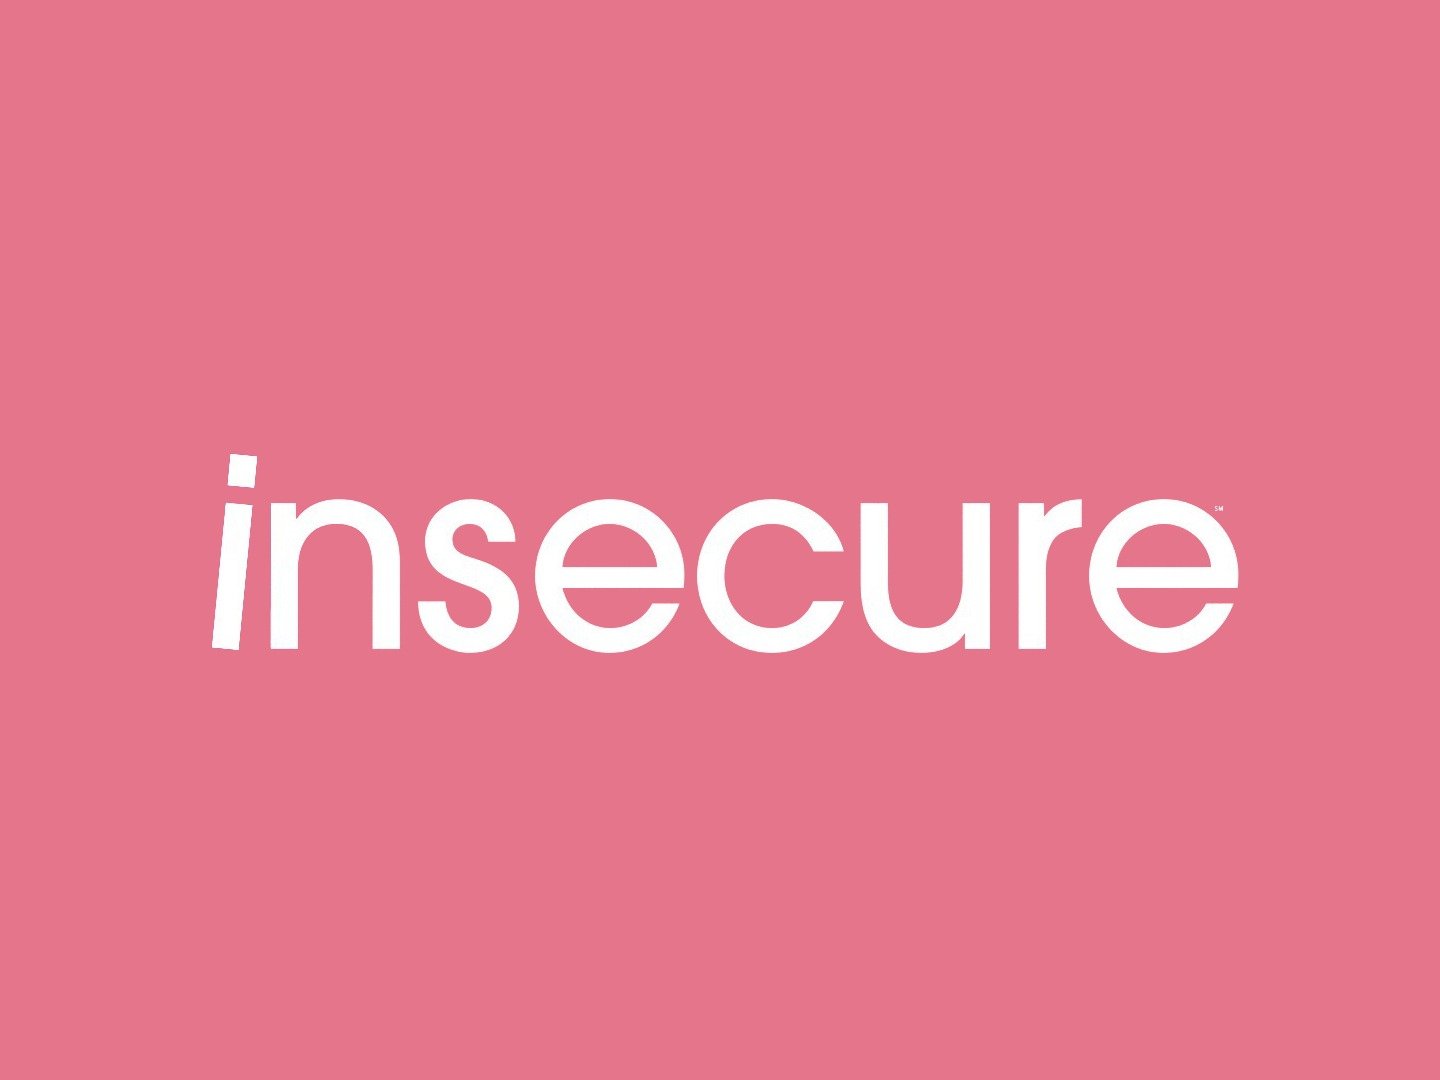 Insecure перевод. Insecure. Insecure обложка. Insecure PNG.